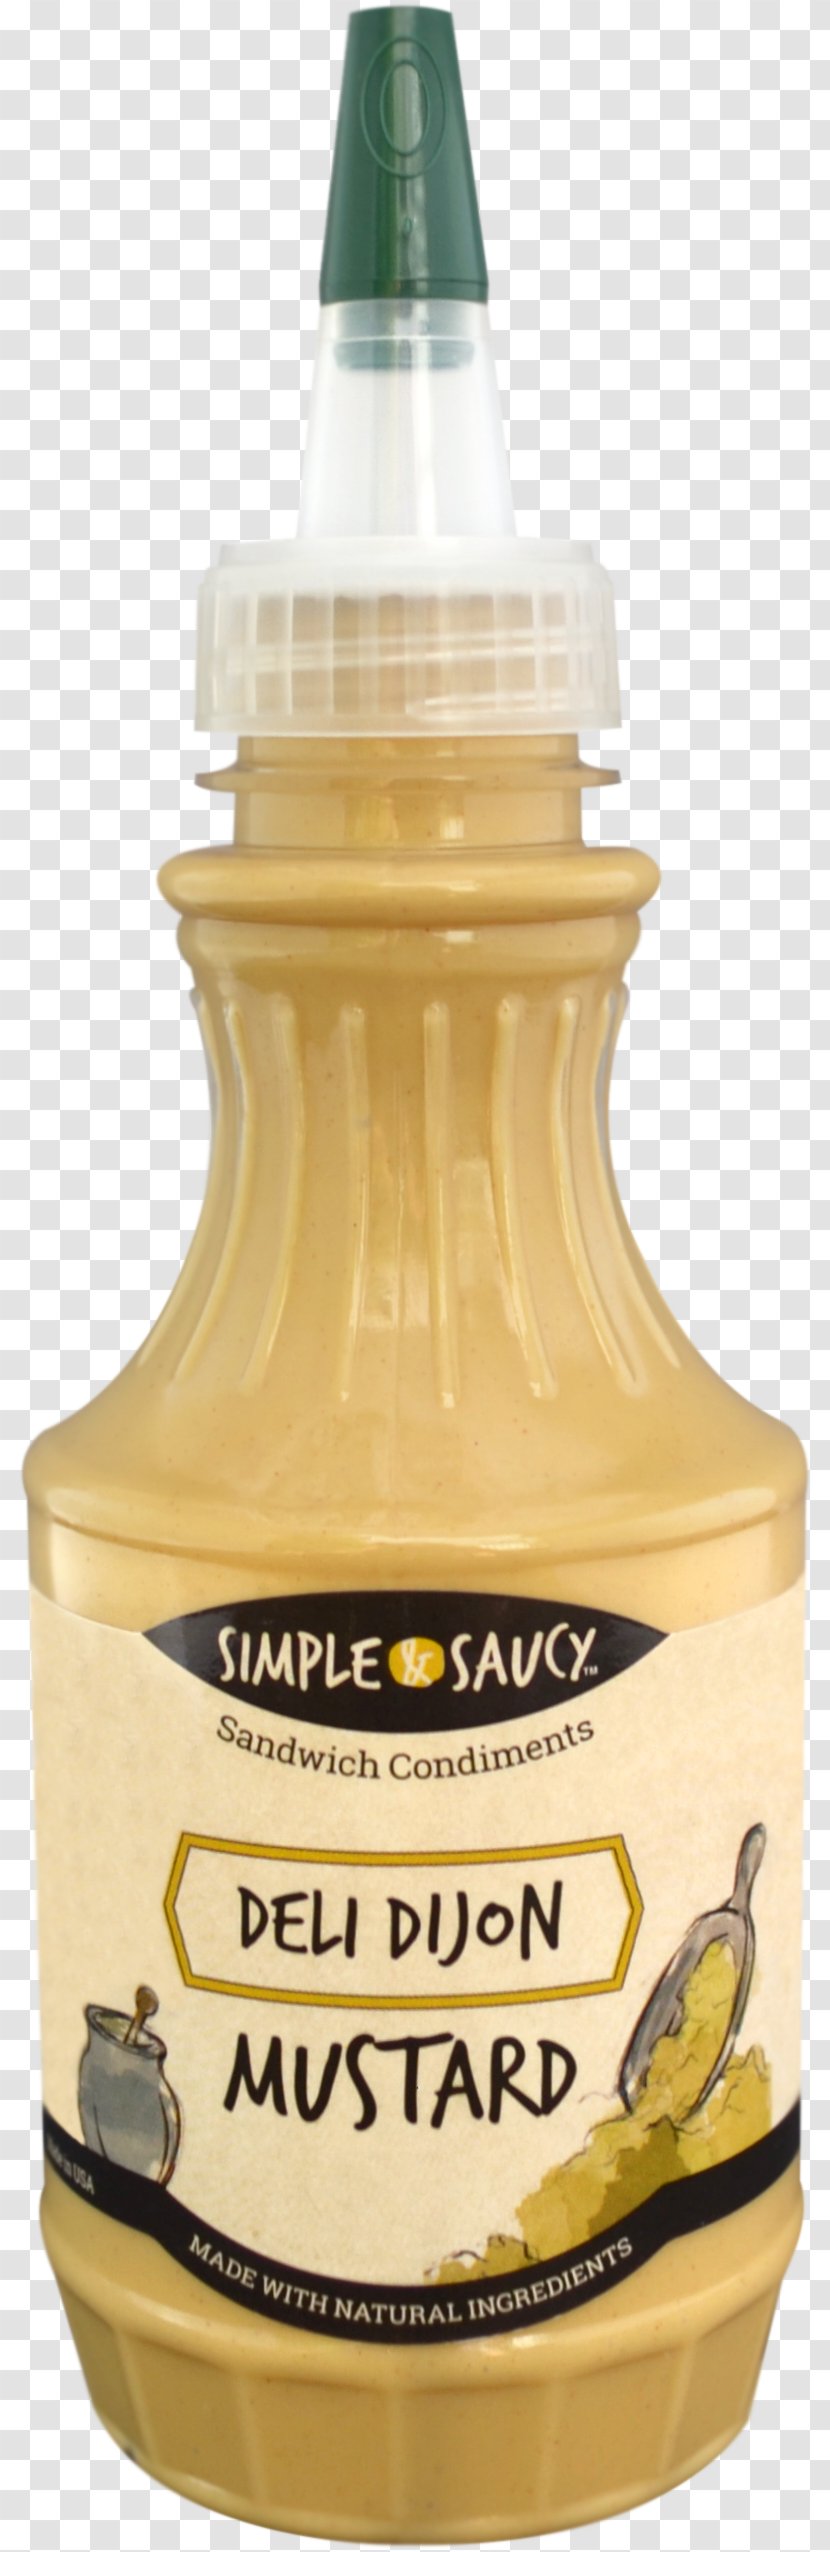 Barbecue Sauce Condiment Salsa World Day Against Child Labour Cream - Saucy Transparent PNG